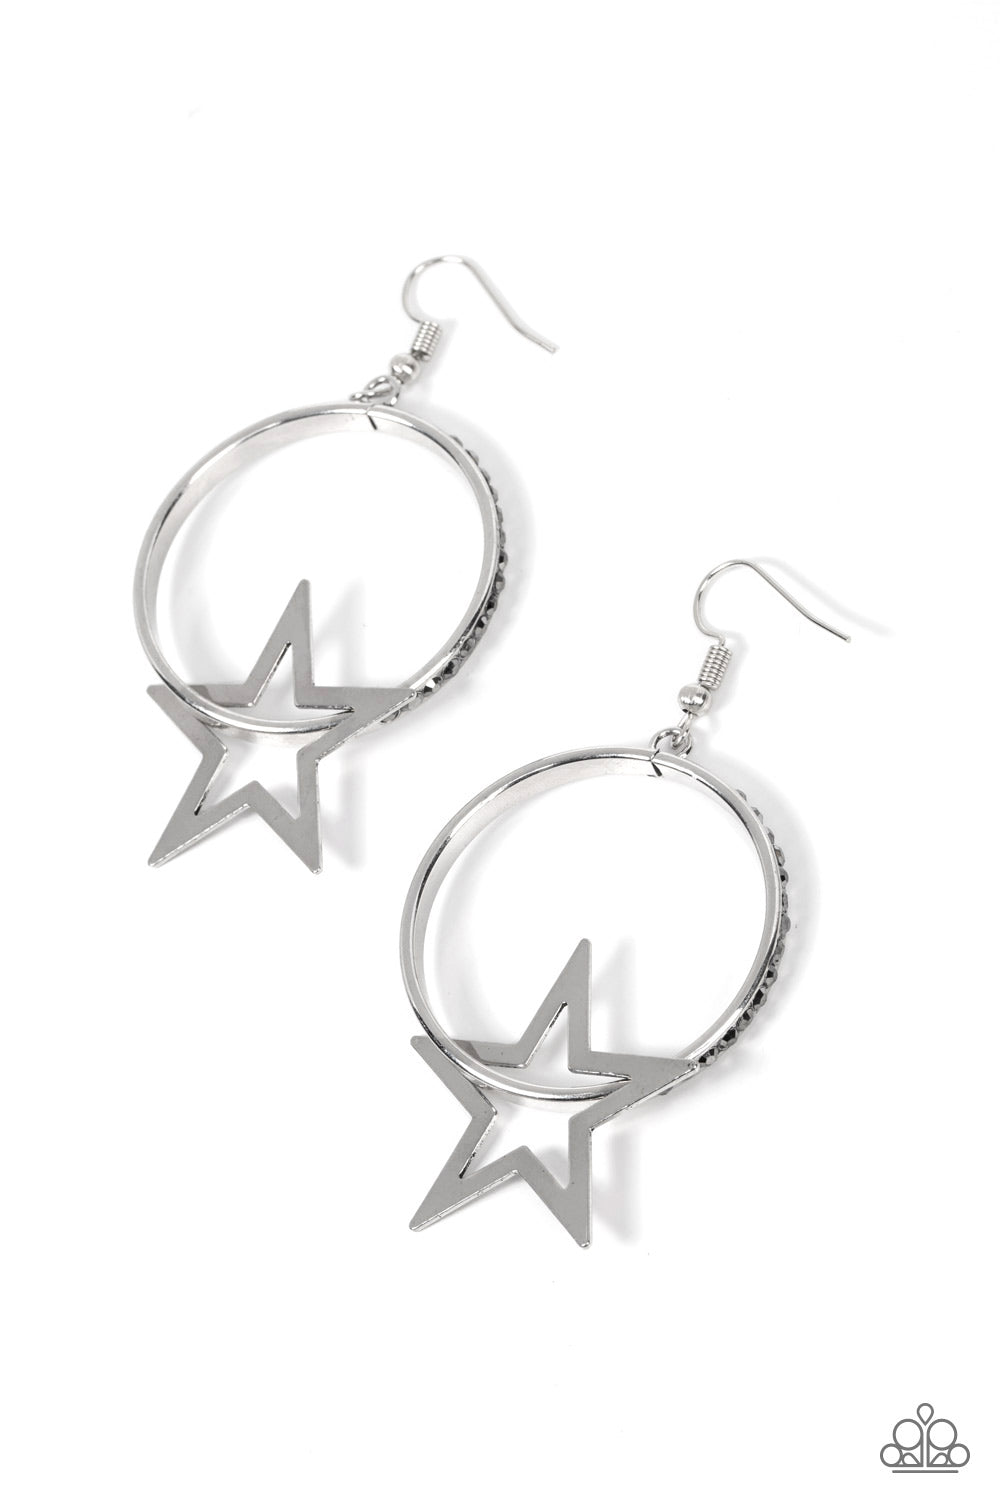 Paparazzi Superstar Showcase - Silver Earrings - A Finishing Touch Jewelry